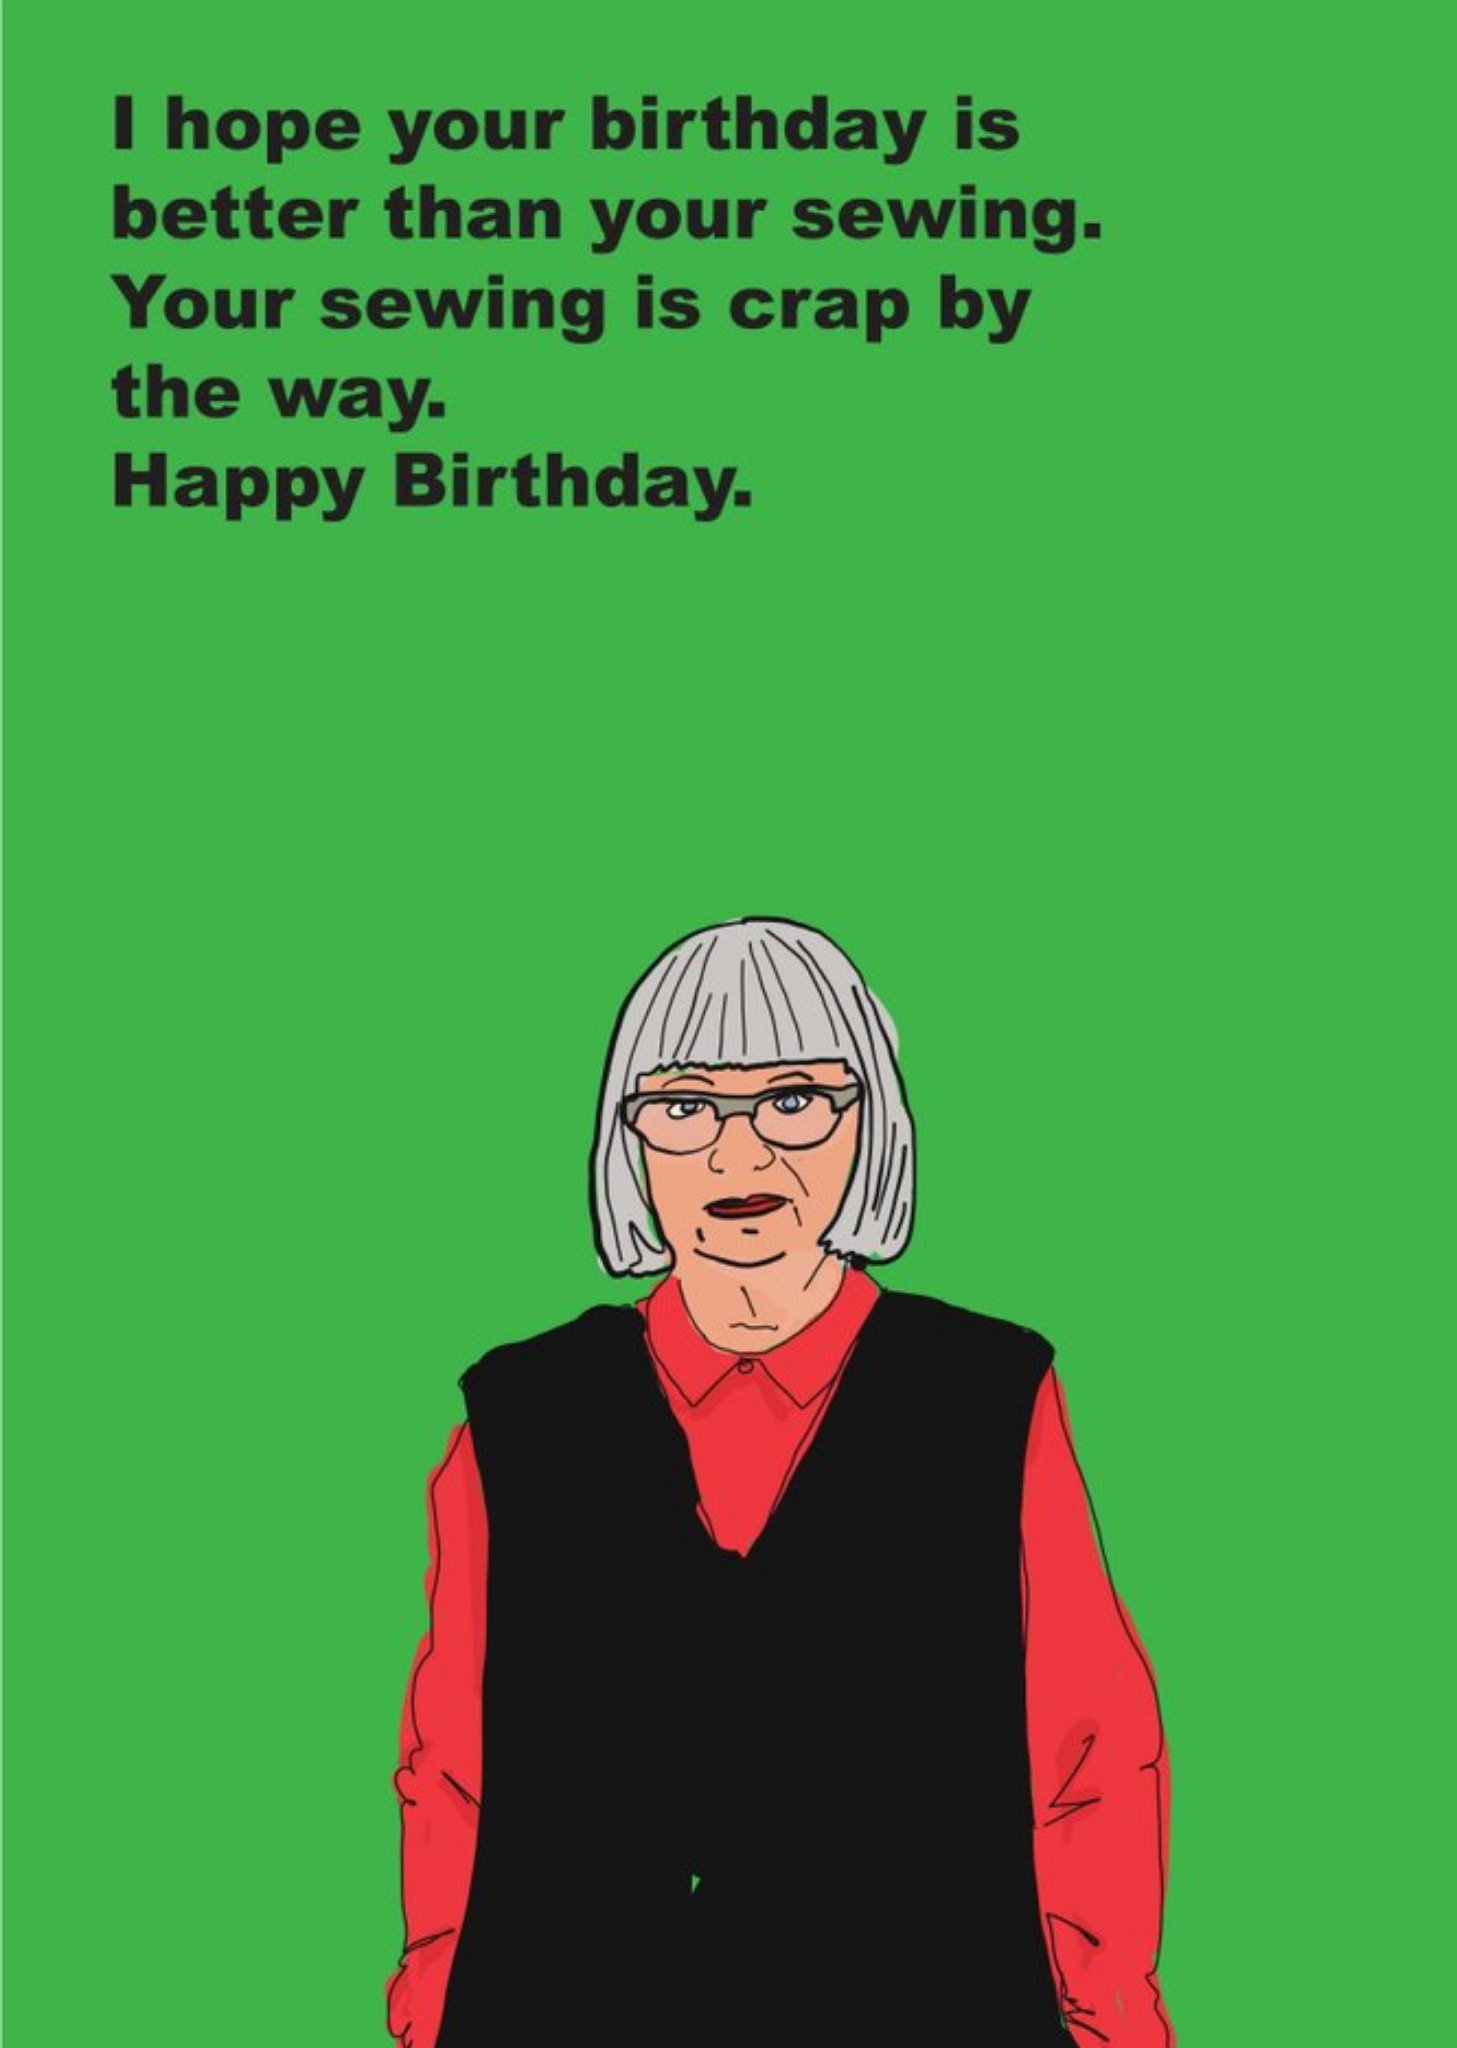 Moonpig Objectables I Hope Your Birthday Is Better Than Your Sewing Celebrity Funny Card, Large